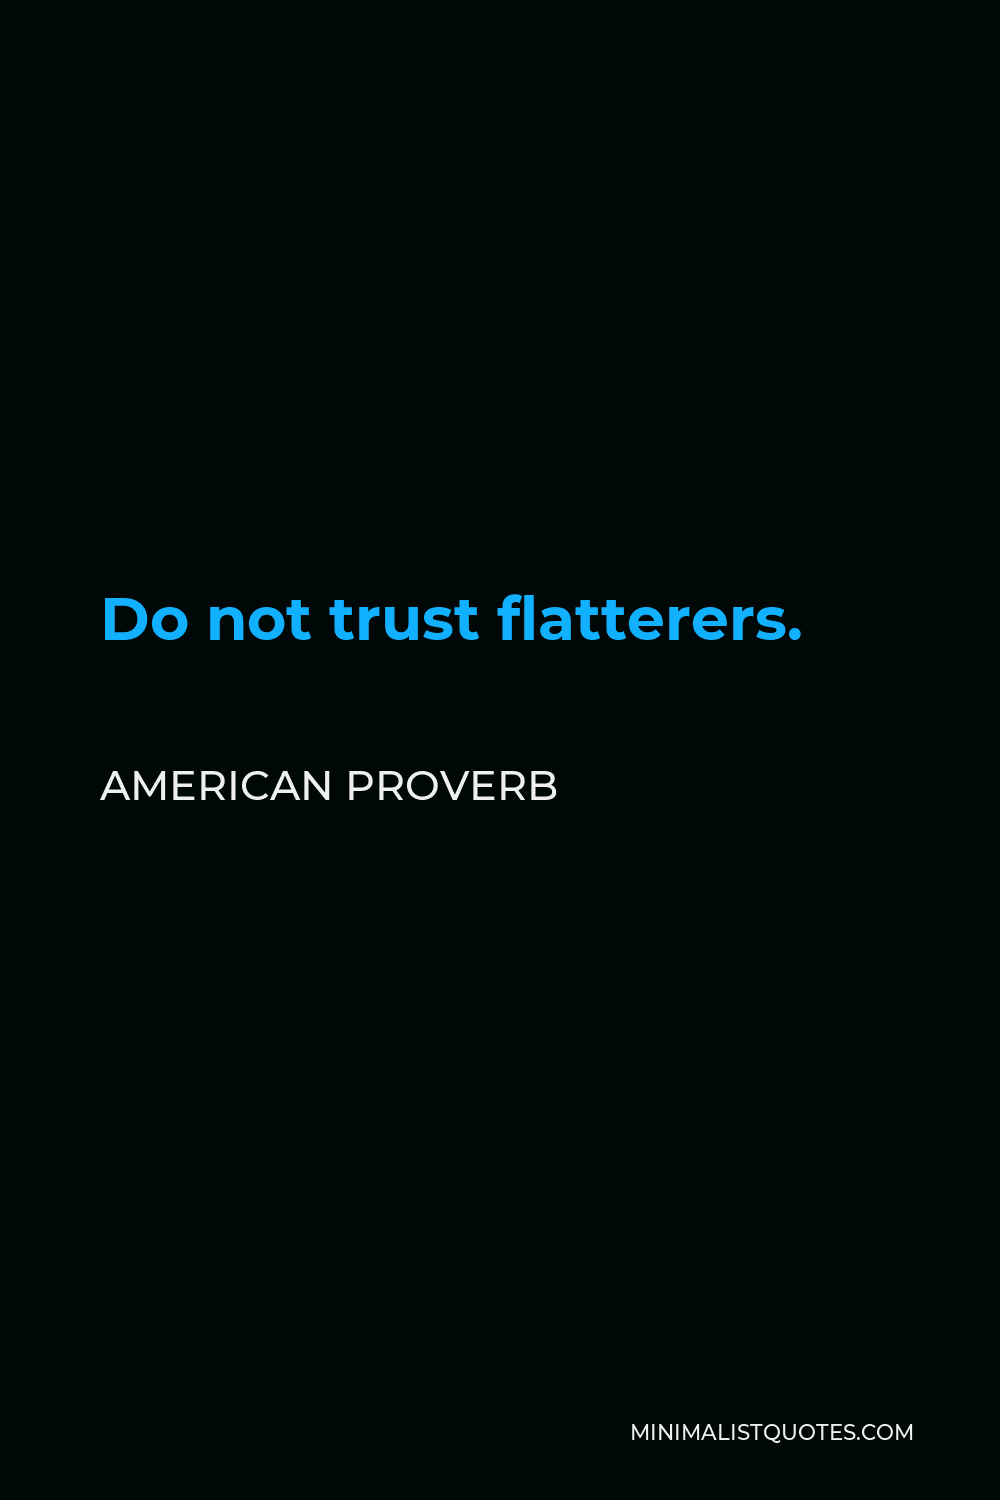 American Proverb Quote - Do not trust flatterers.